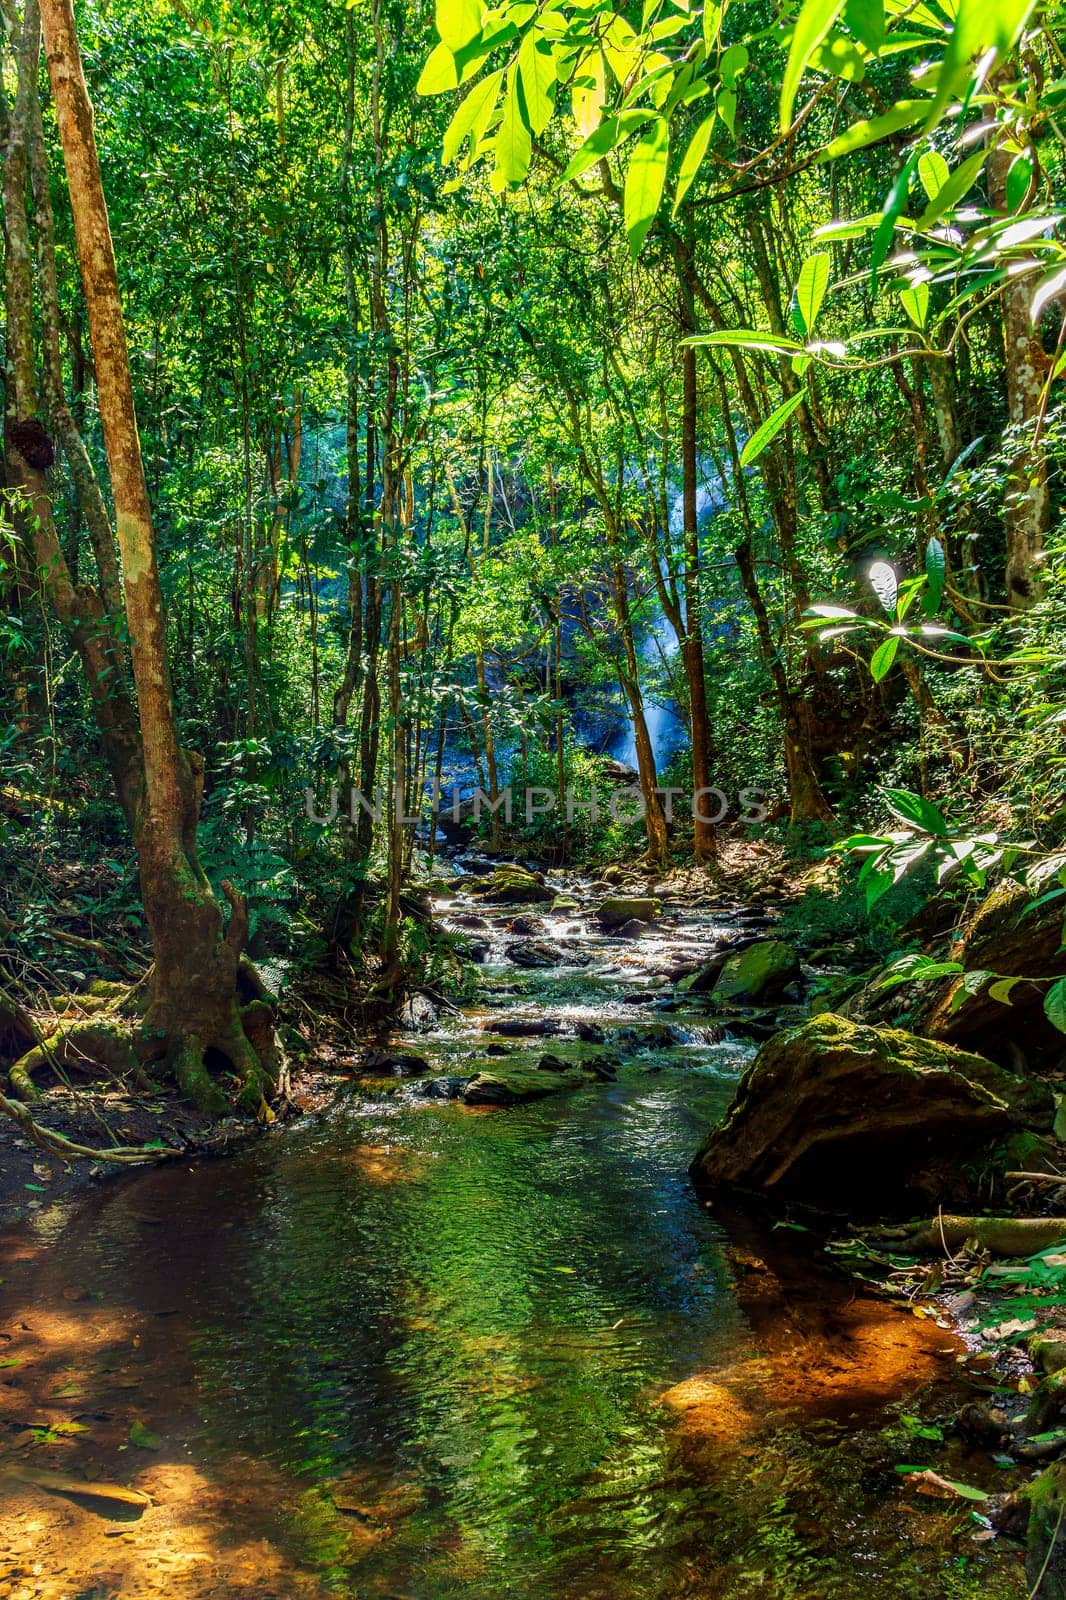 Dense rainforest vegetation crossed by the river by Fred_Pinheiro